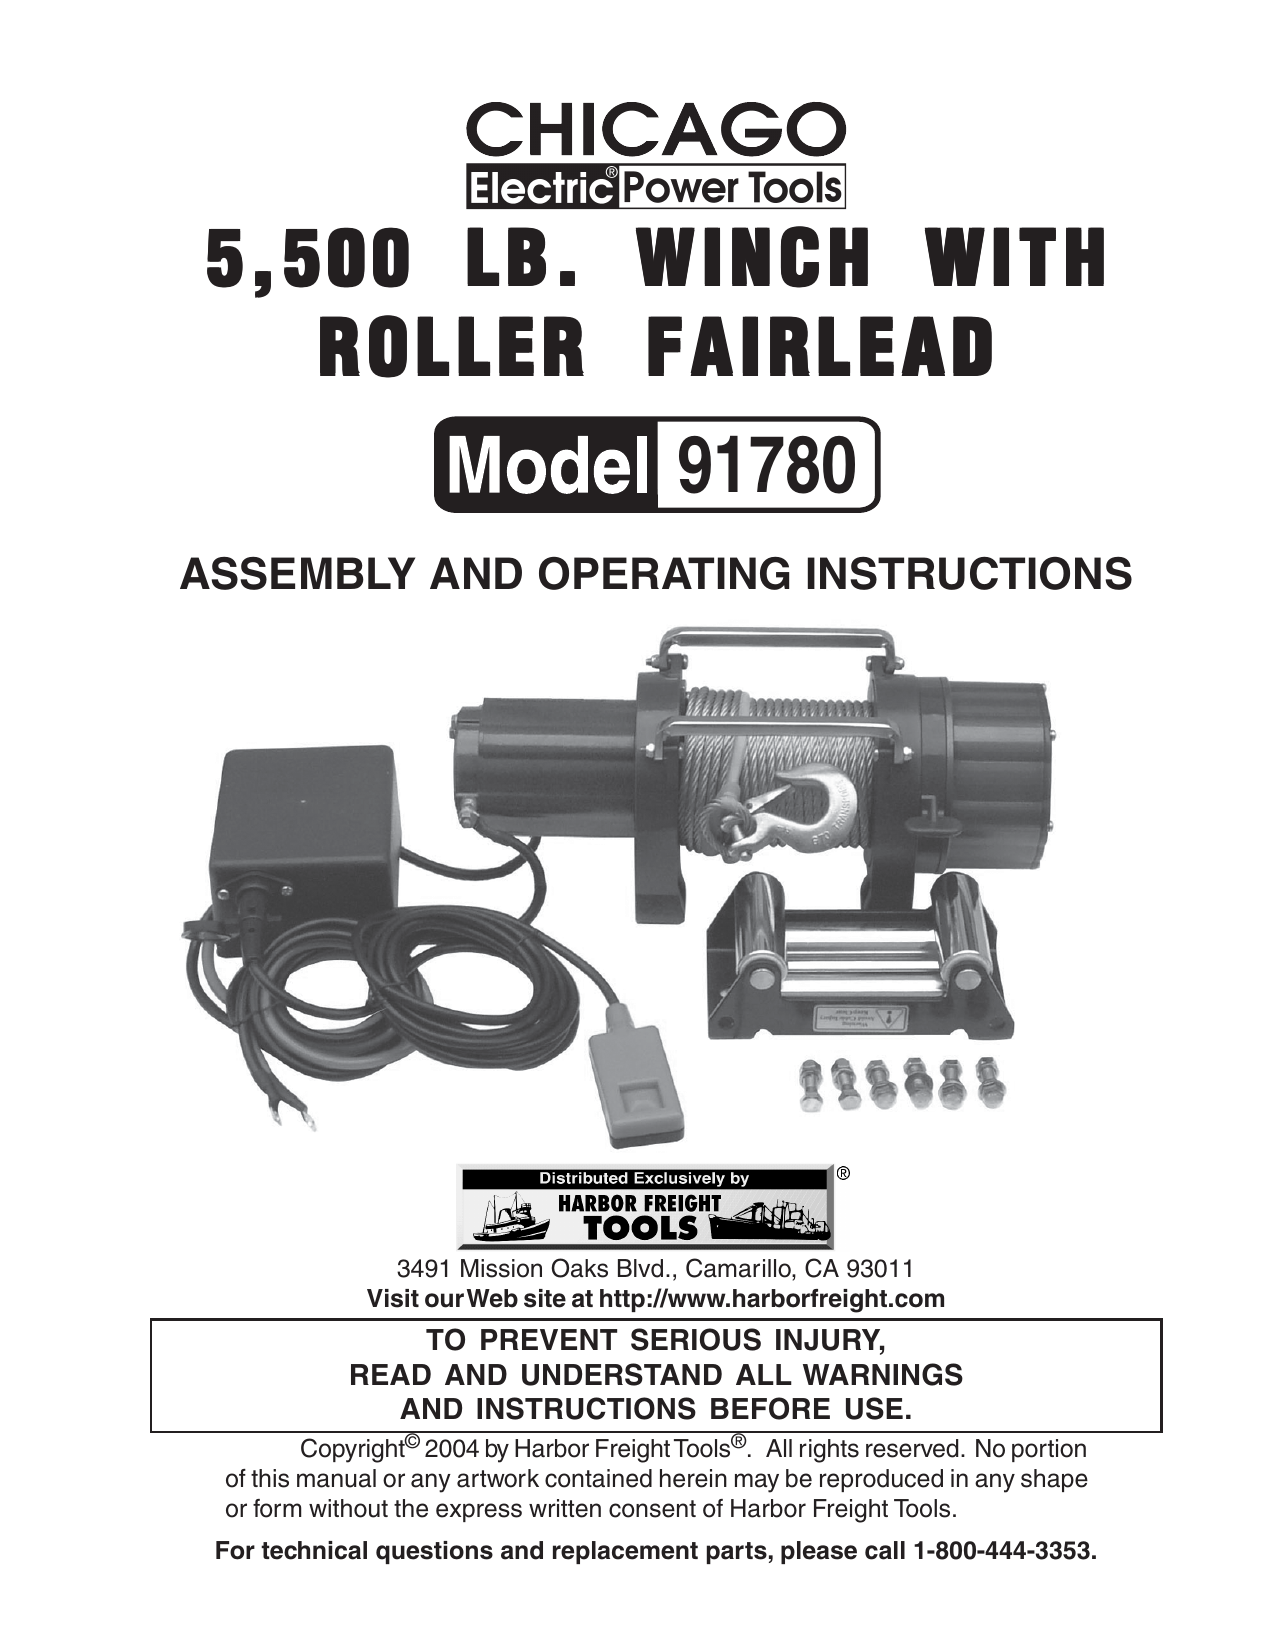 Chicago Electric Power Roller WINCH WITH5,500 LB User manual | Manualzz  Manualzz